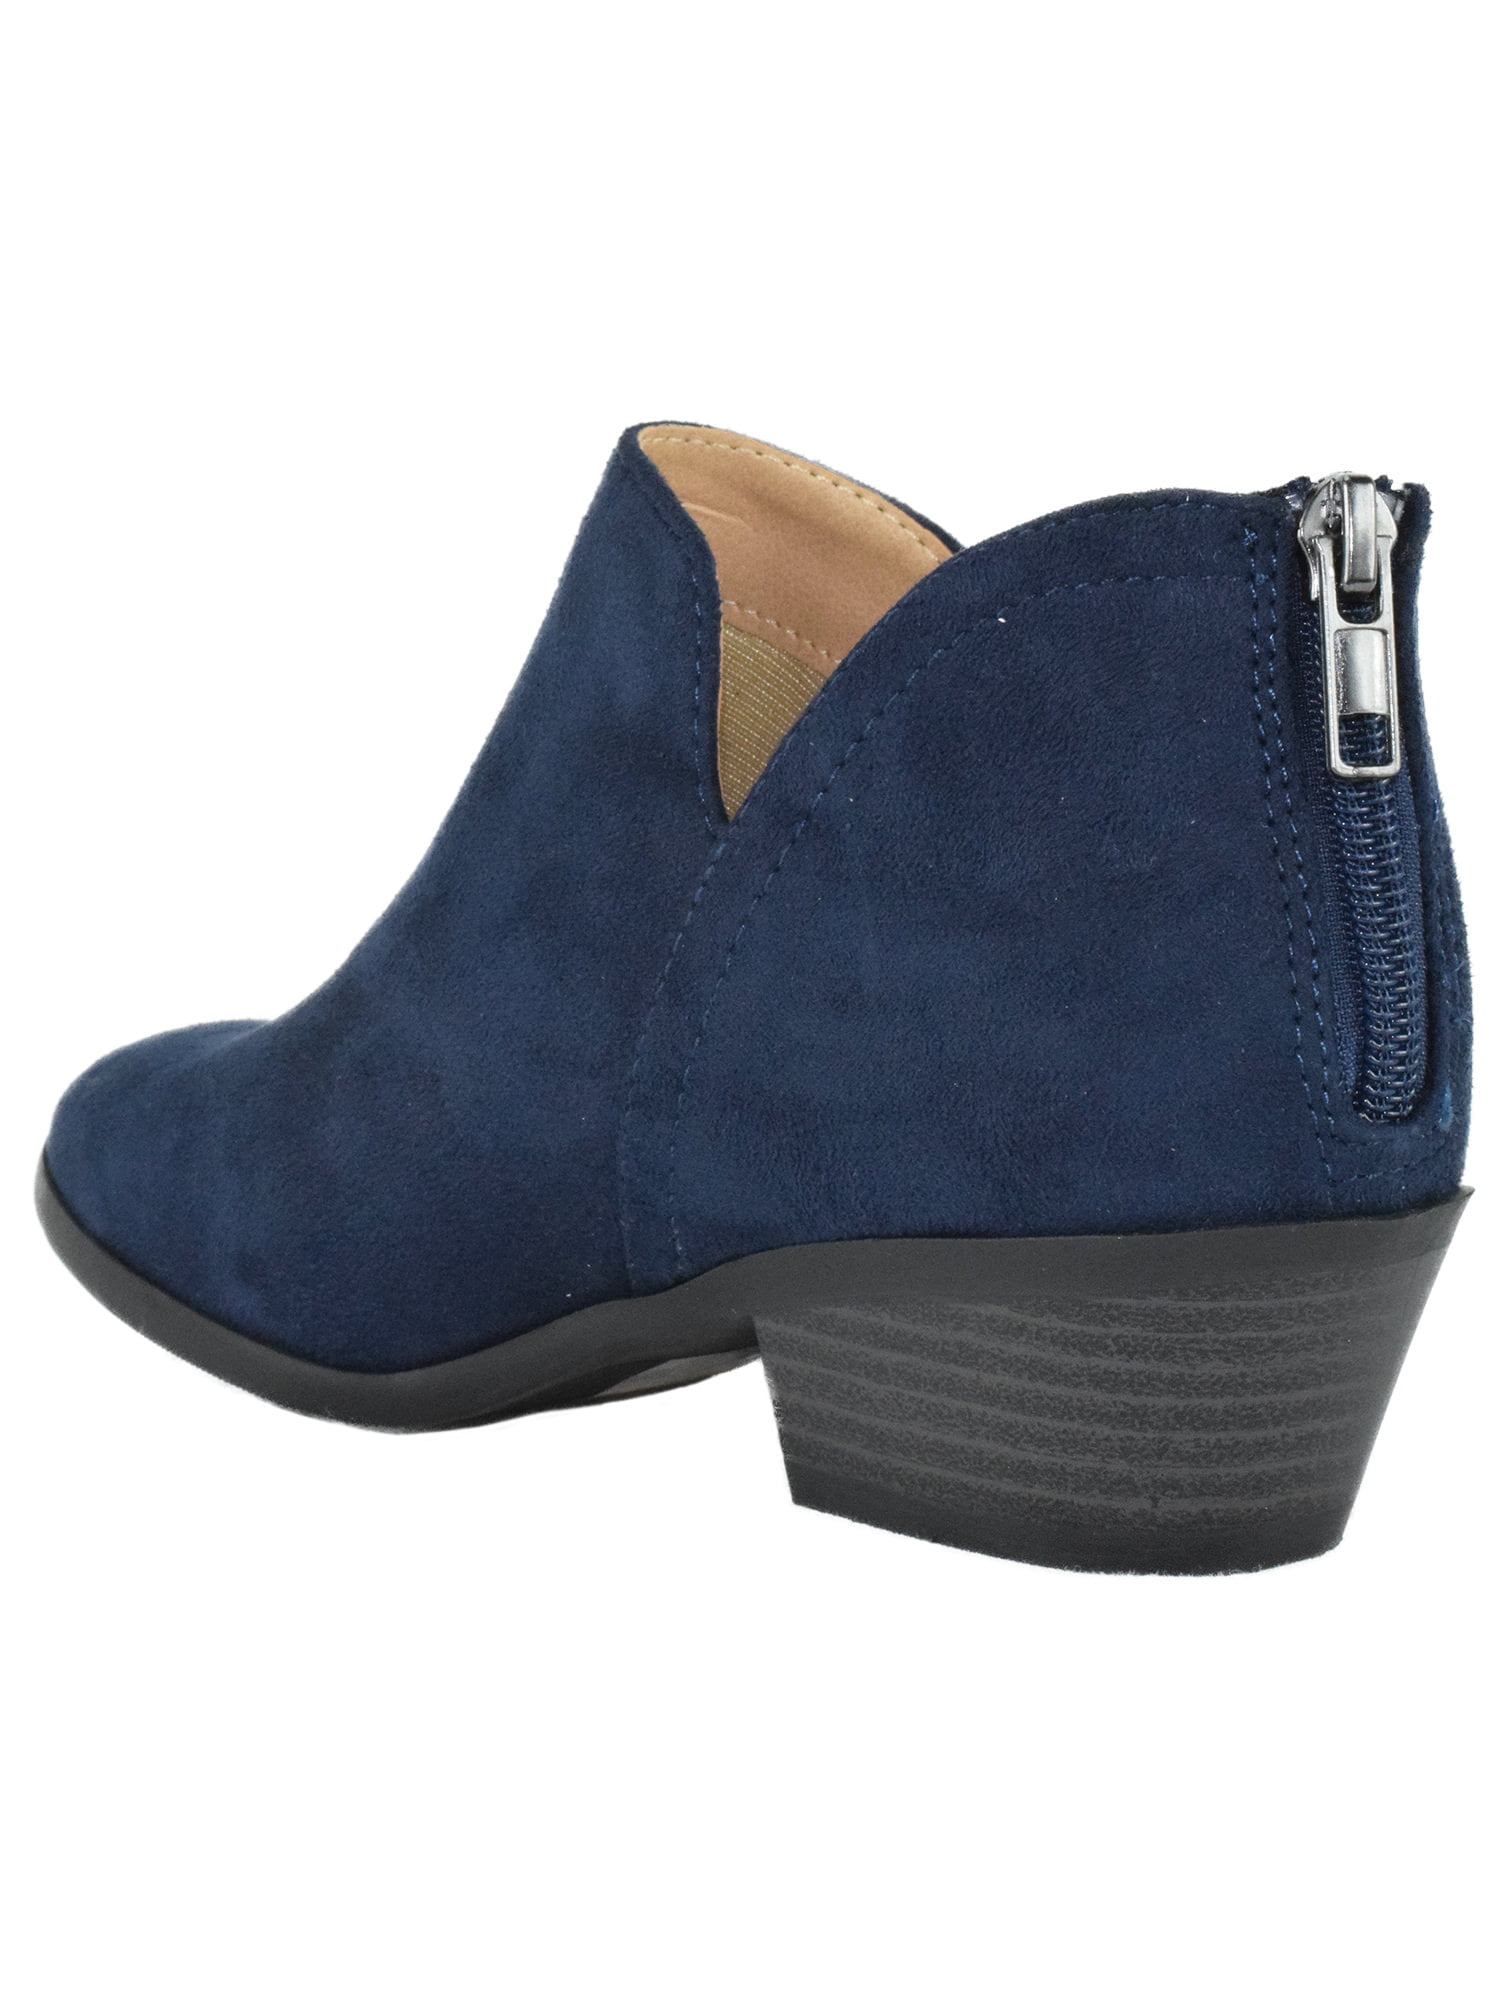 navy suede ankle boots womens